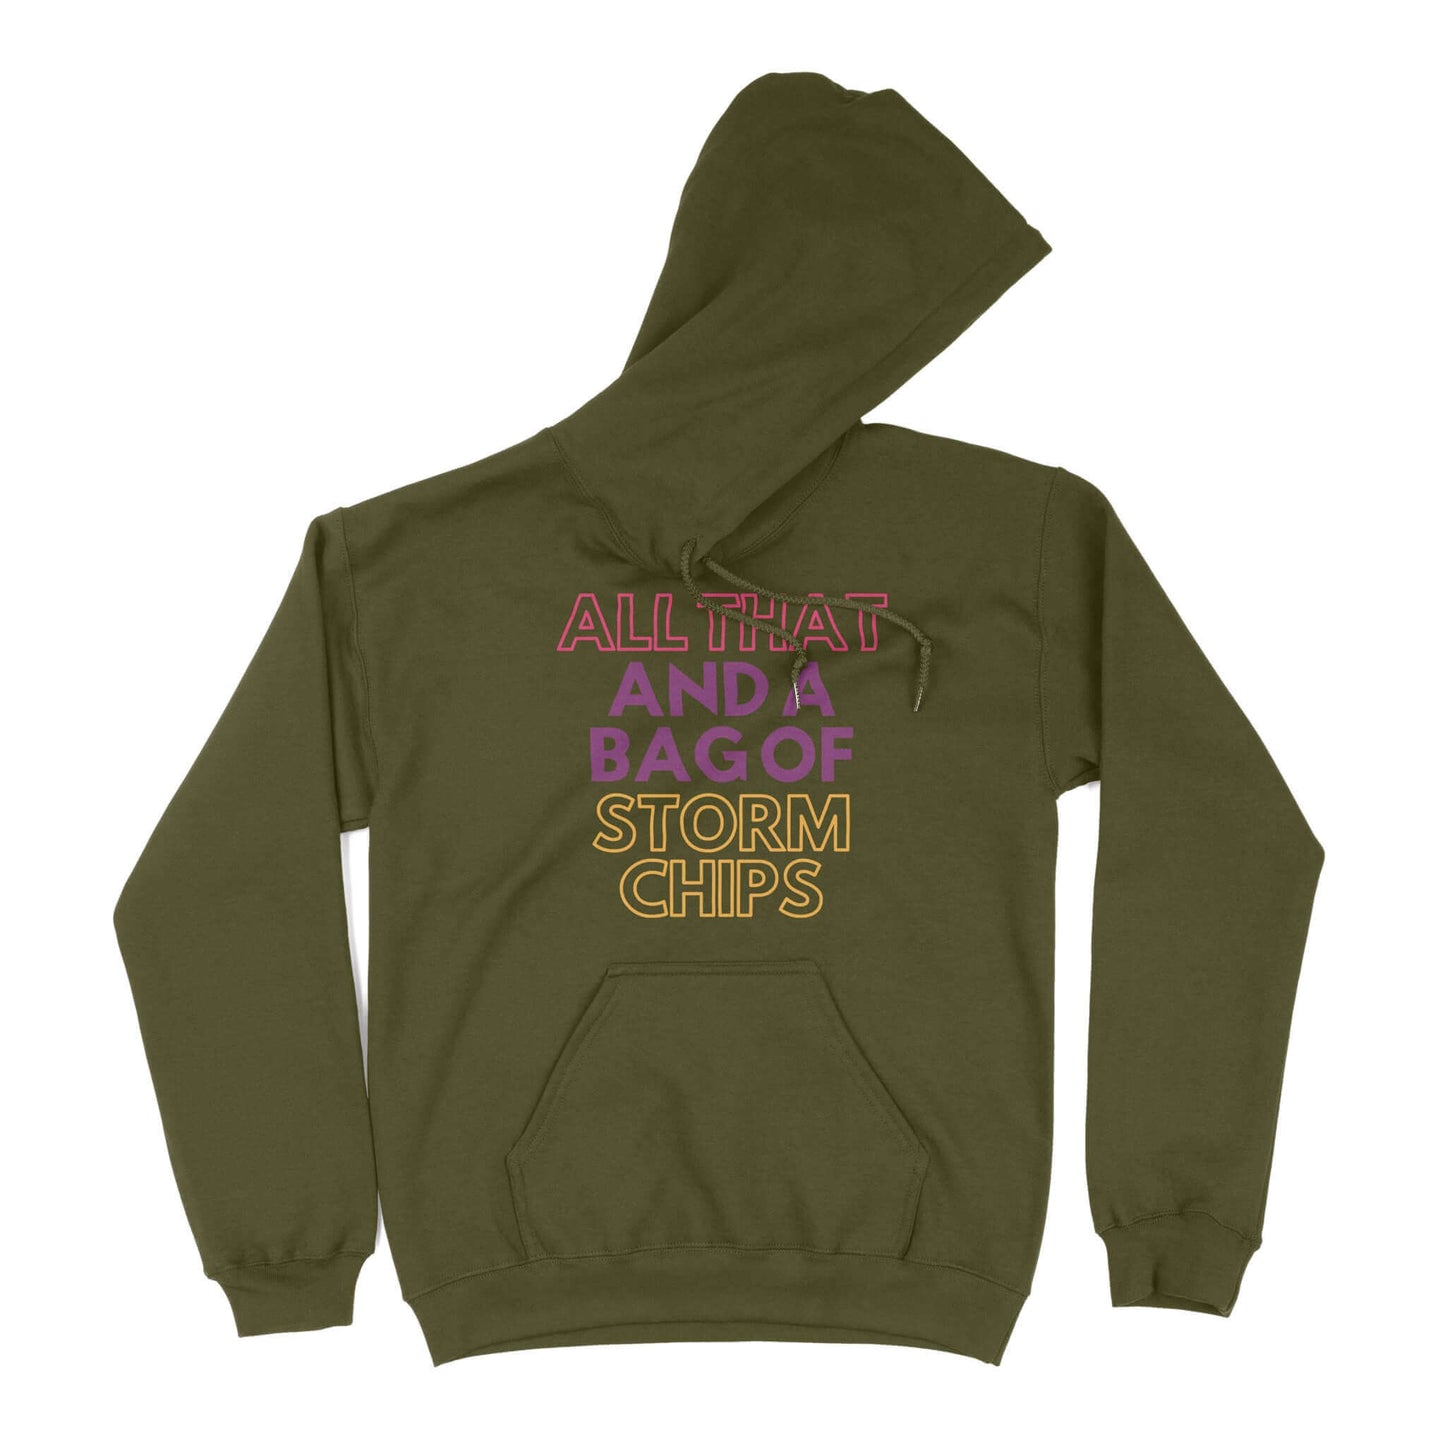 All That and a Bag of Storm Chips Unisex Hoodie in Color: Military Green - East Coast AF Apparel